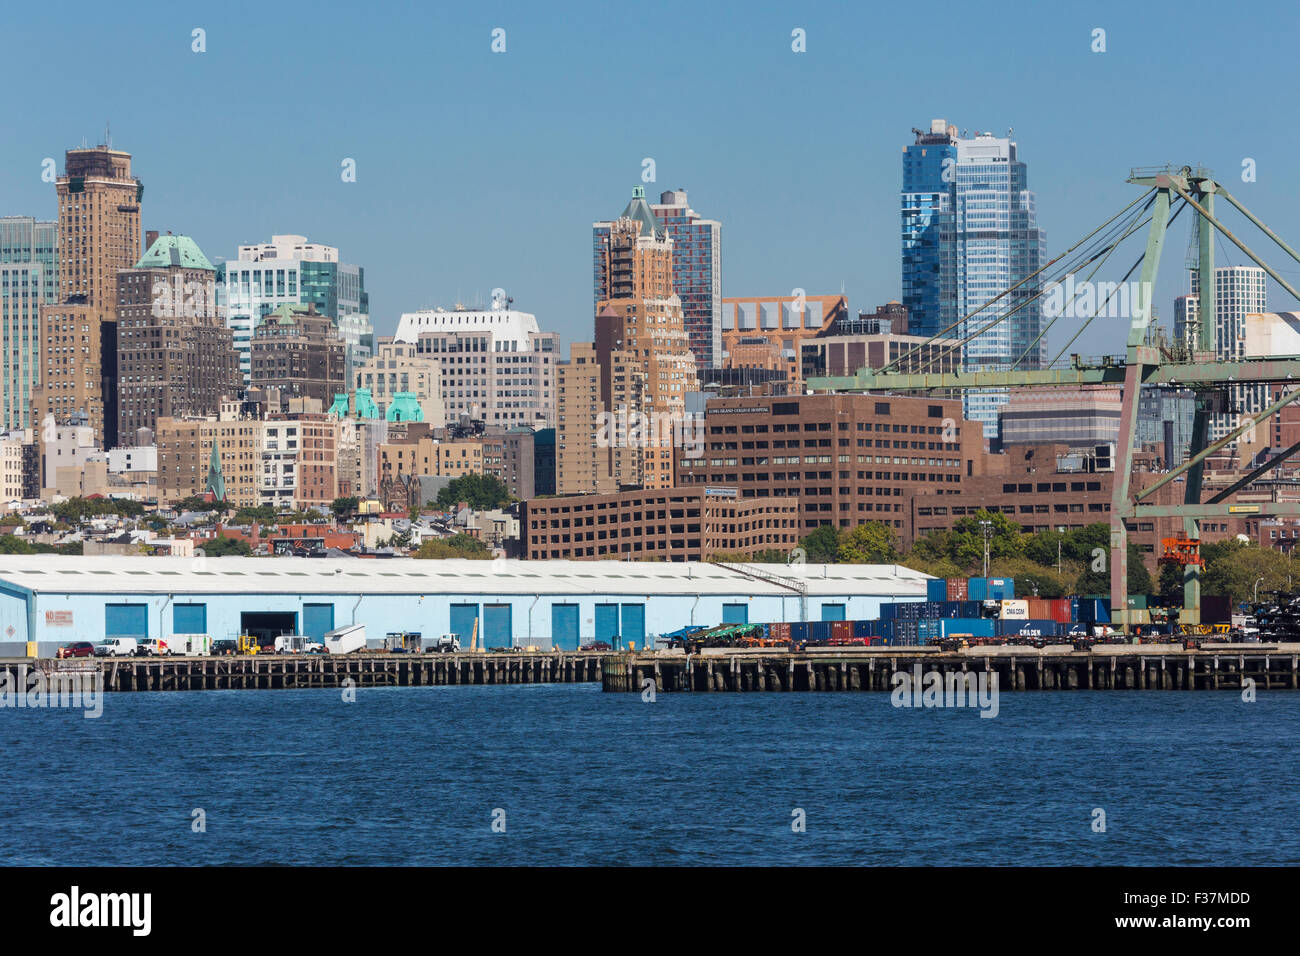 Warehouses on the Docks, Atlantic Basin Waterfront in Red Hook, Brooklyn, NYC Stock Photo